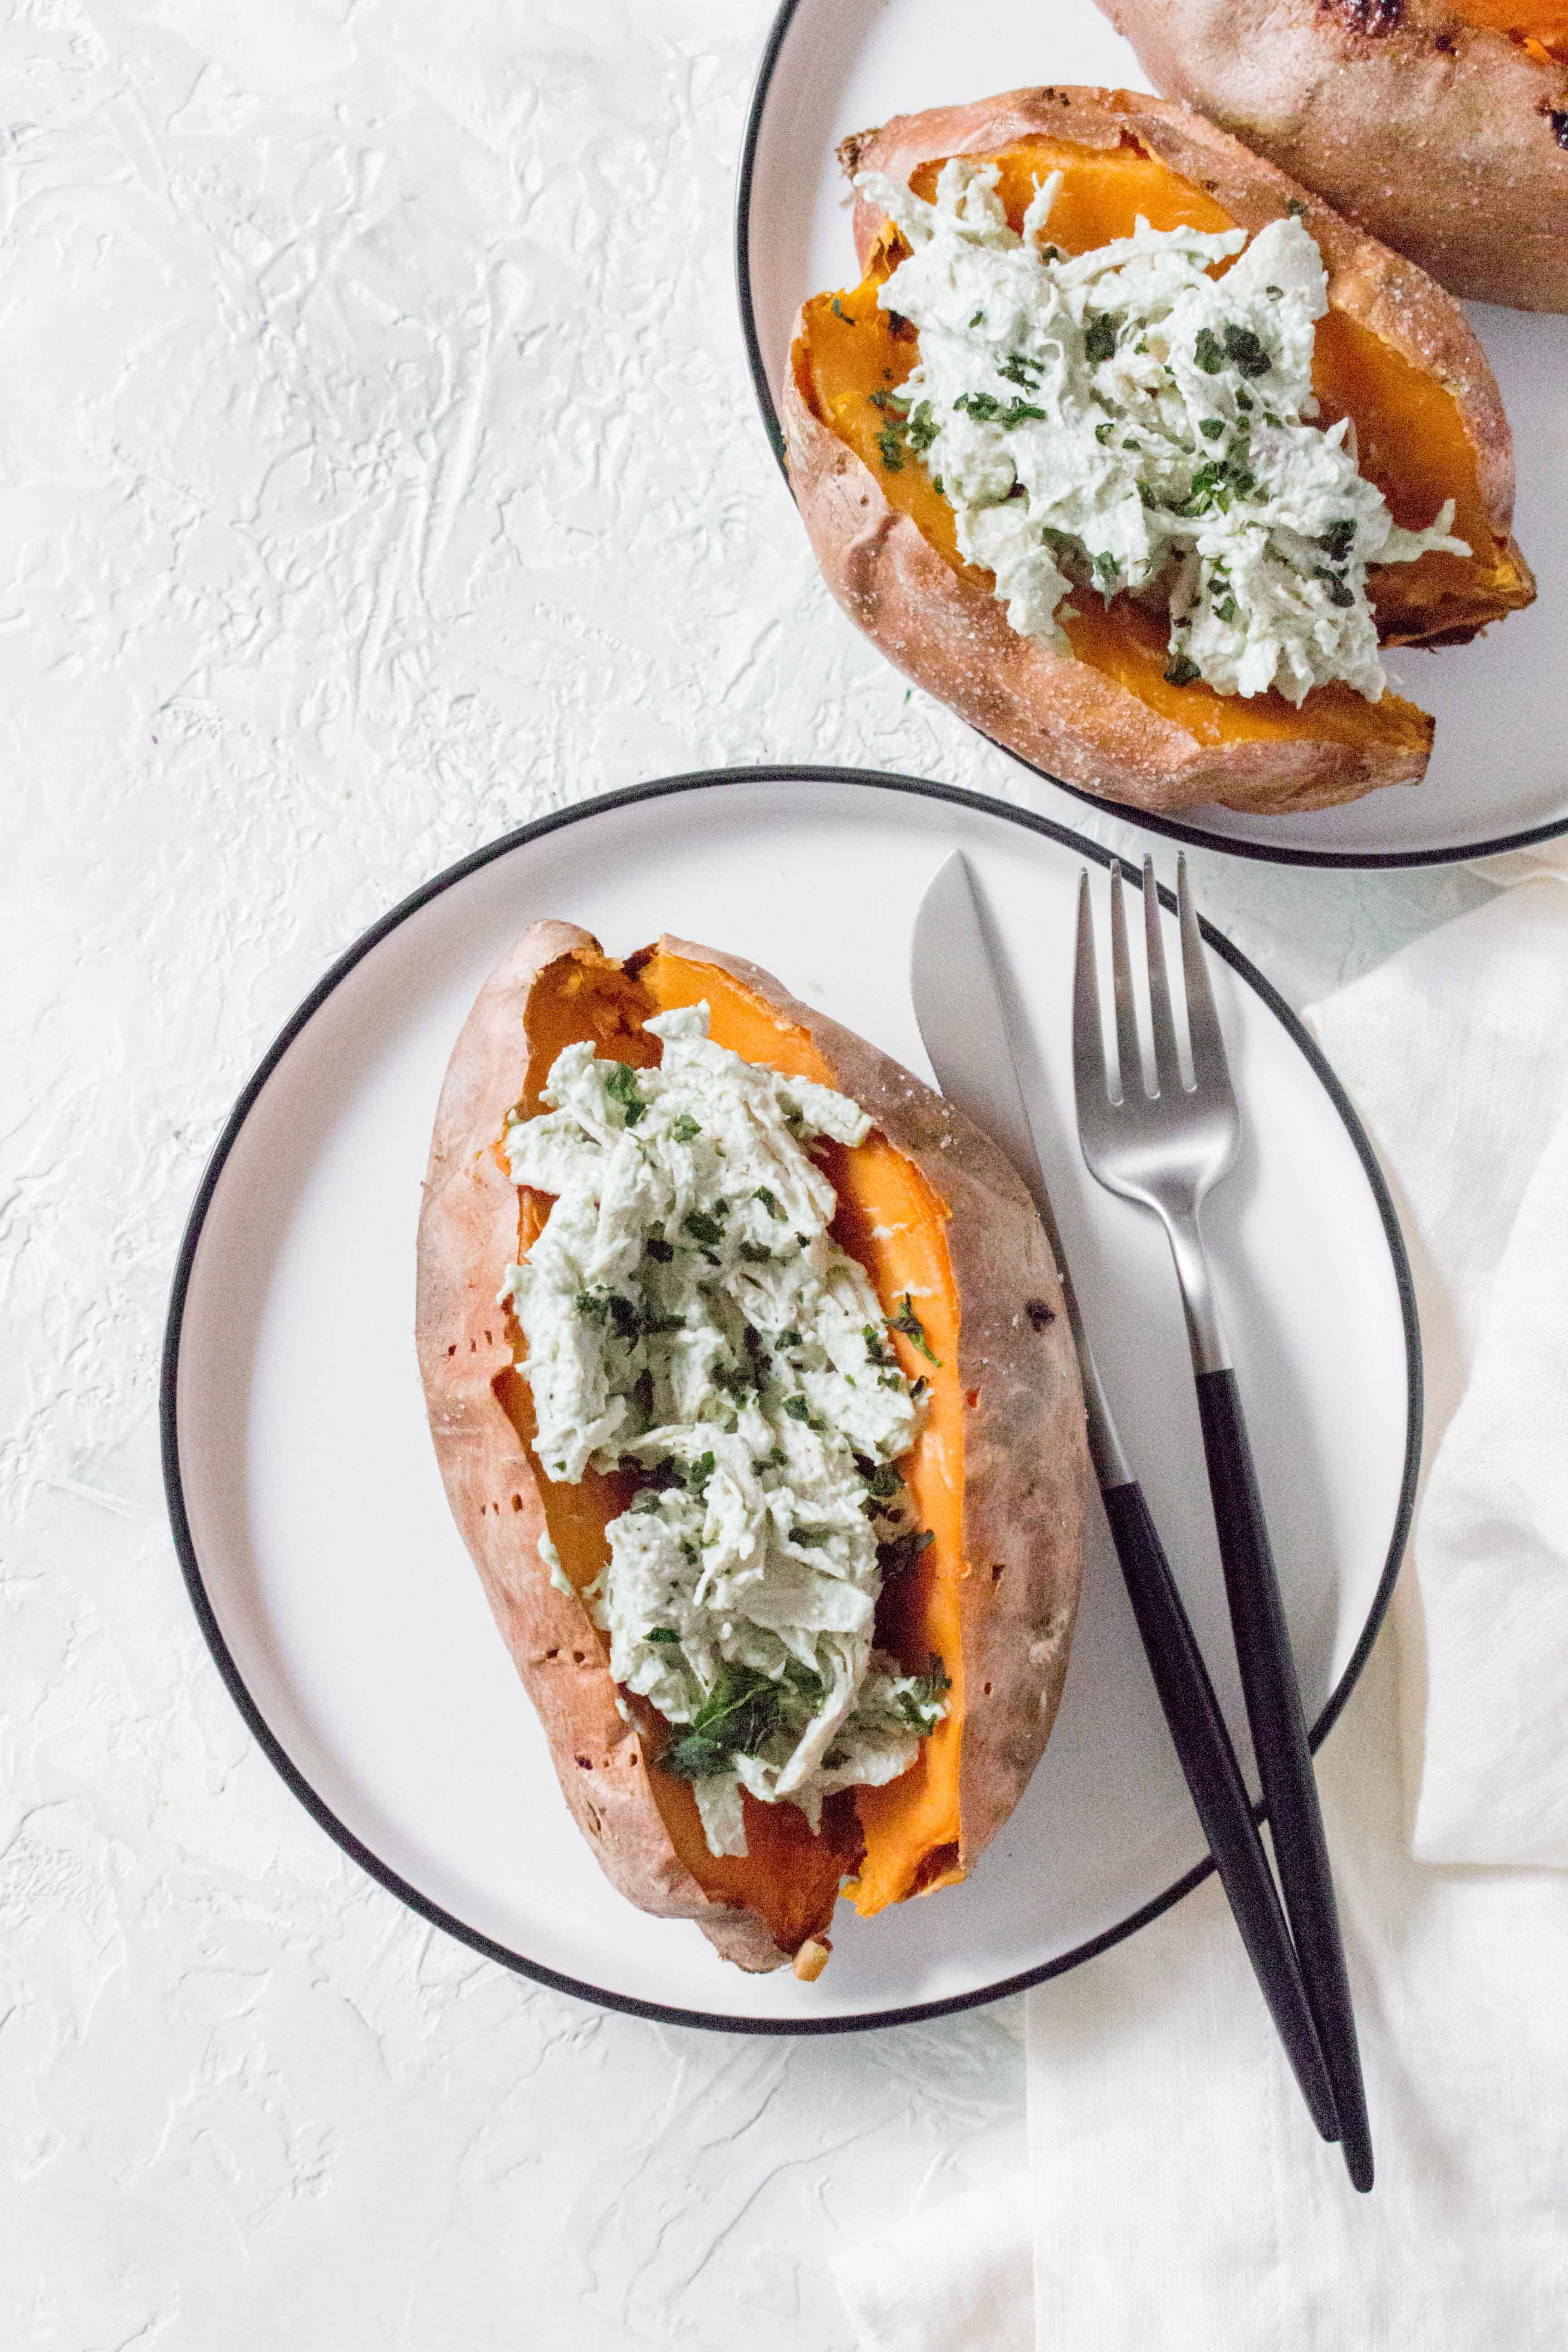 Ways to Eat An Airfryer Baked Sweet Potato